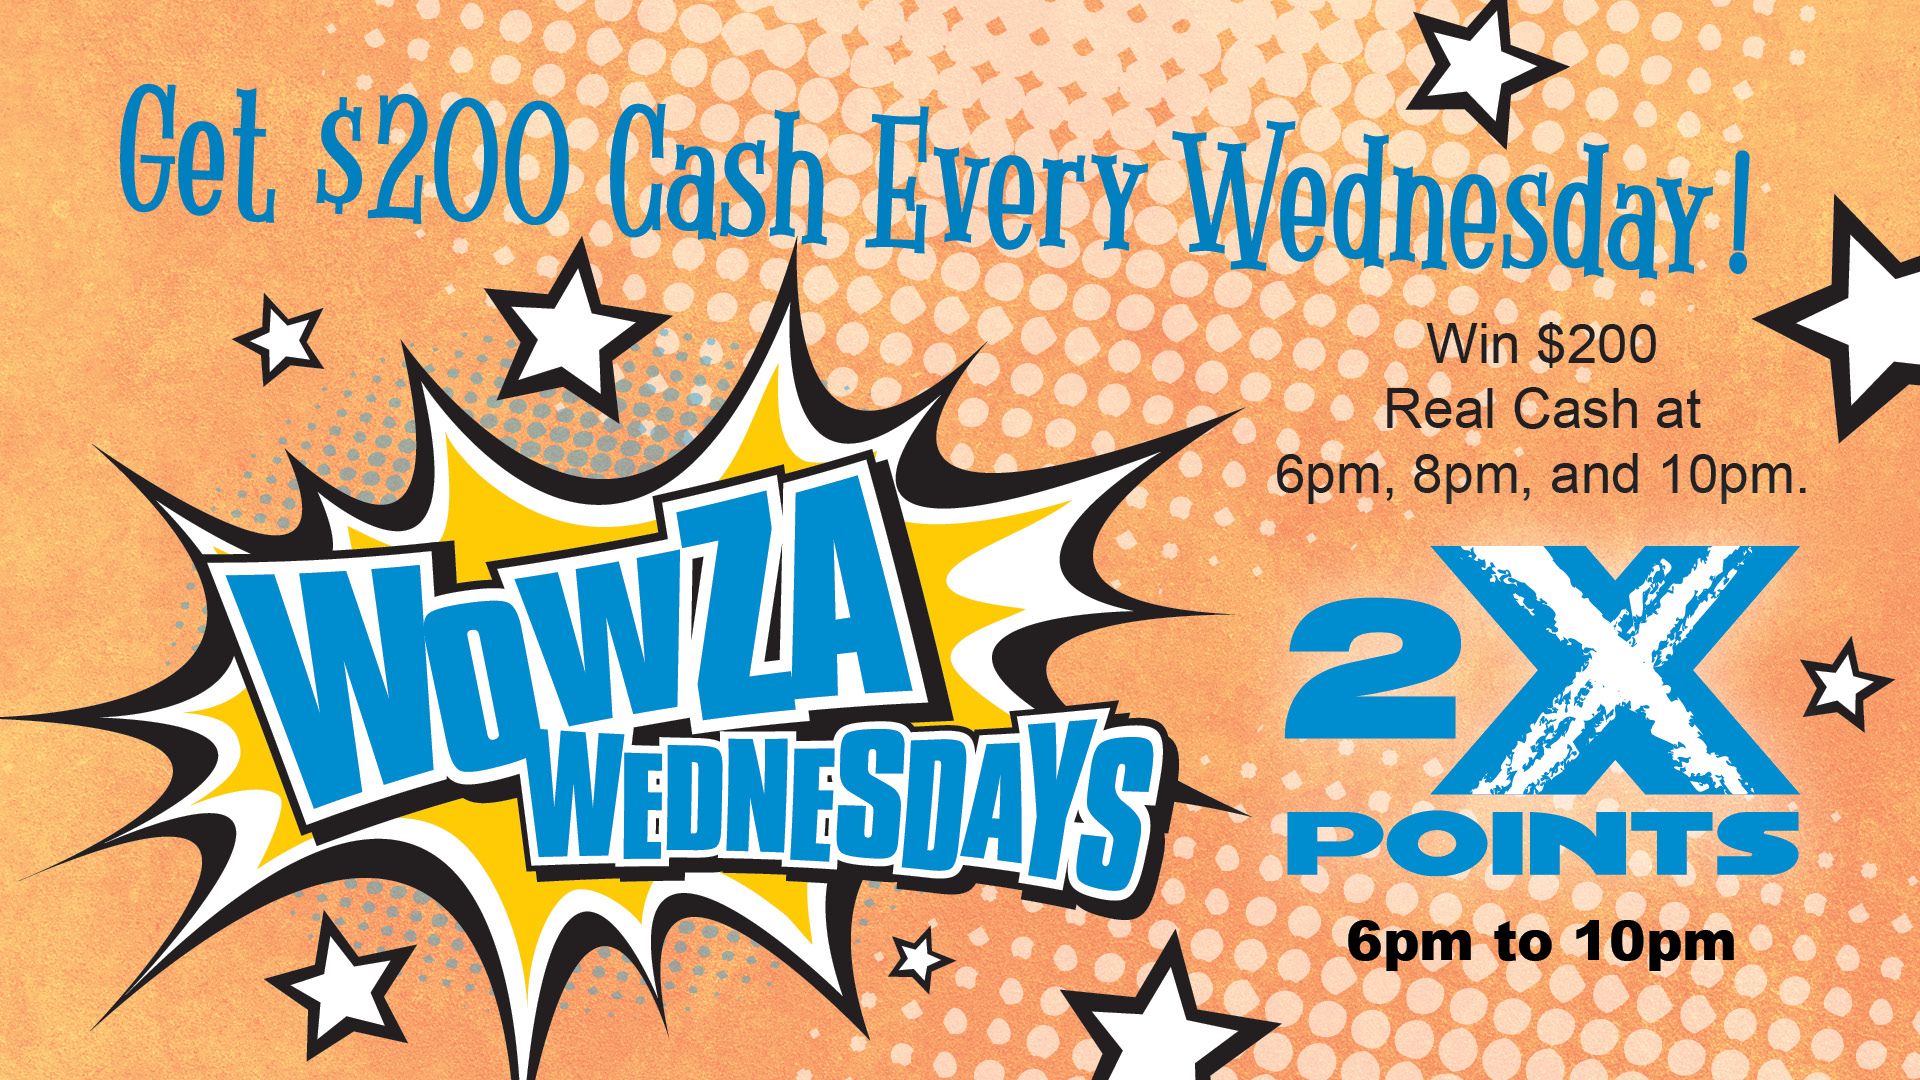 Wowza Wednesdays - get $200 cash every Wednesday! Win $200 real cash at 6pm, 8pm, and 10pm. 2x points 6pm to 10pm.